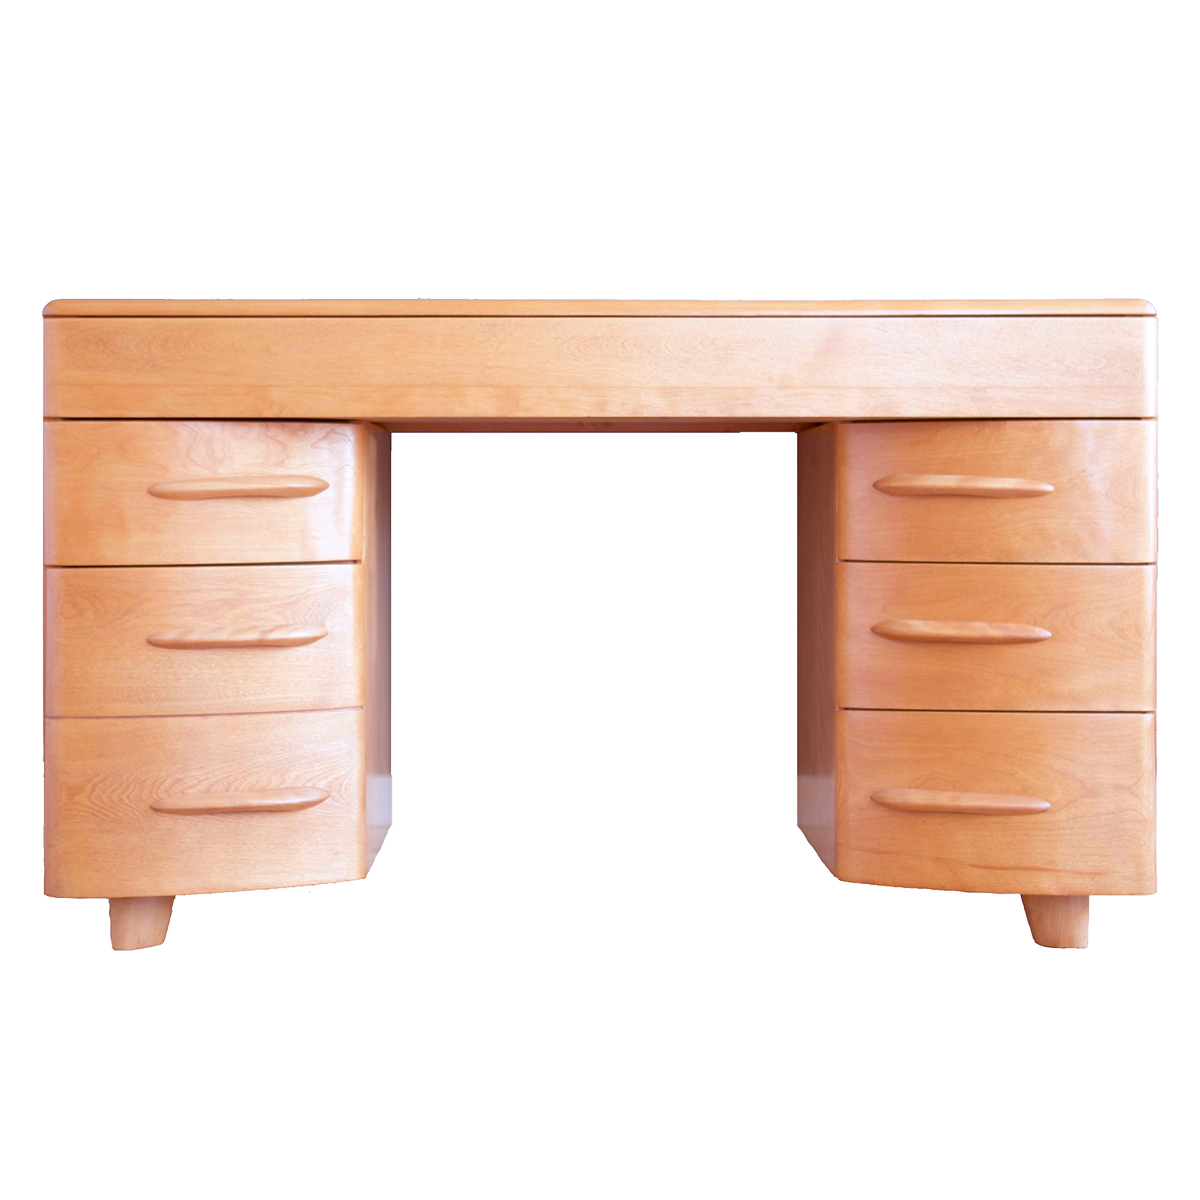 Heywood Wakefield Solid Maple Champagne Kneehole Desk Modernist Icon